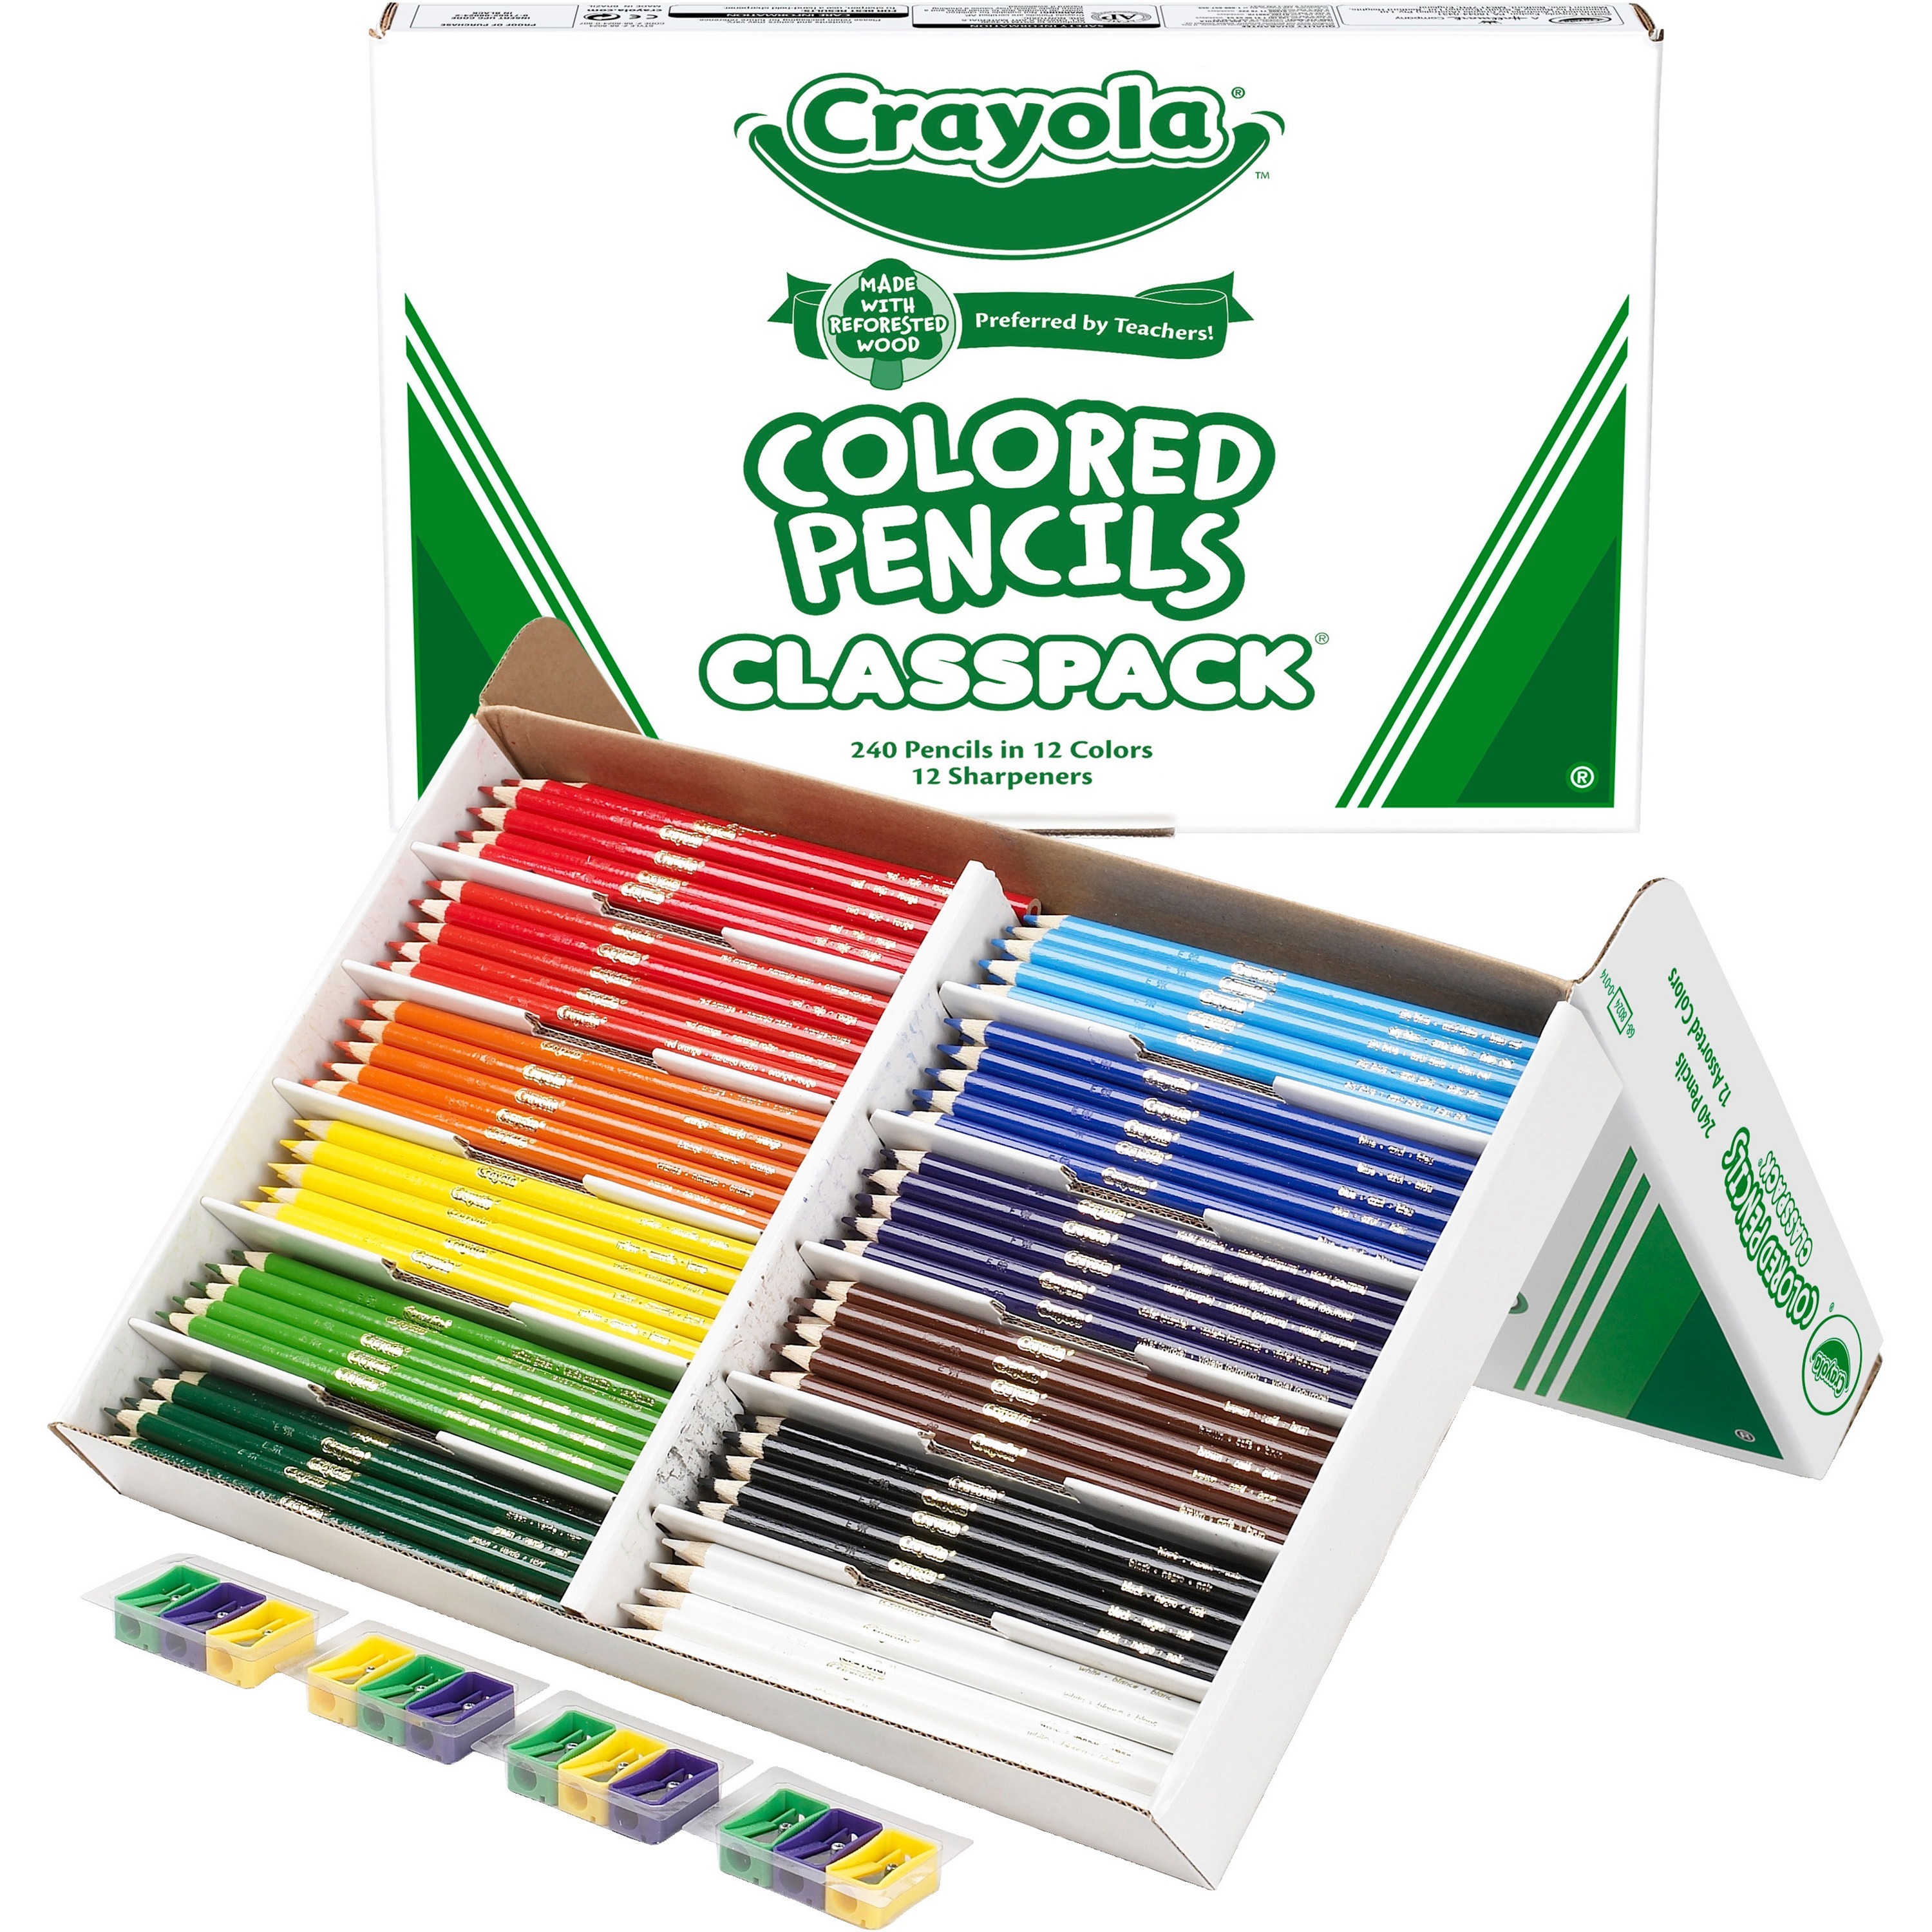 Crayola Colored Pencil Set - Assorted Colors, Set of 12